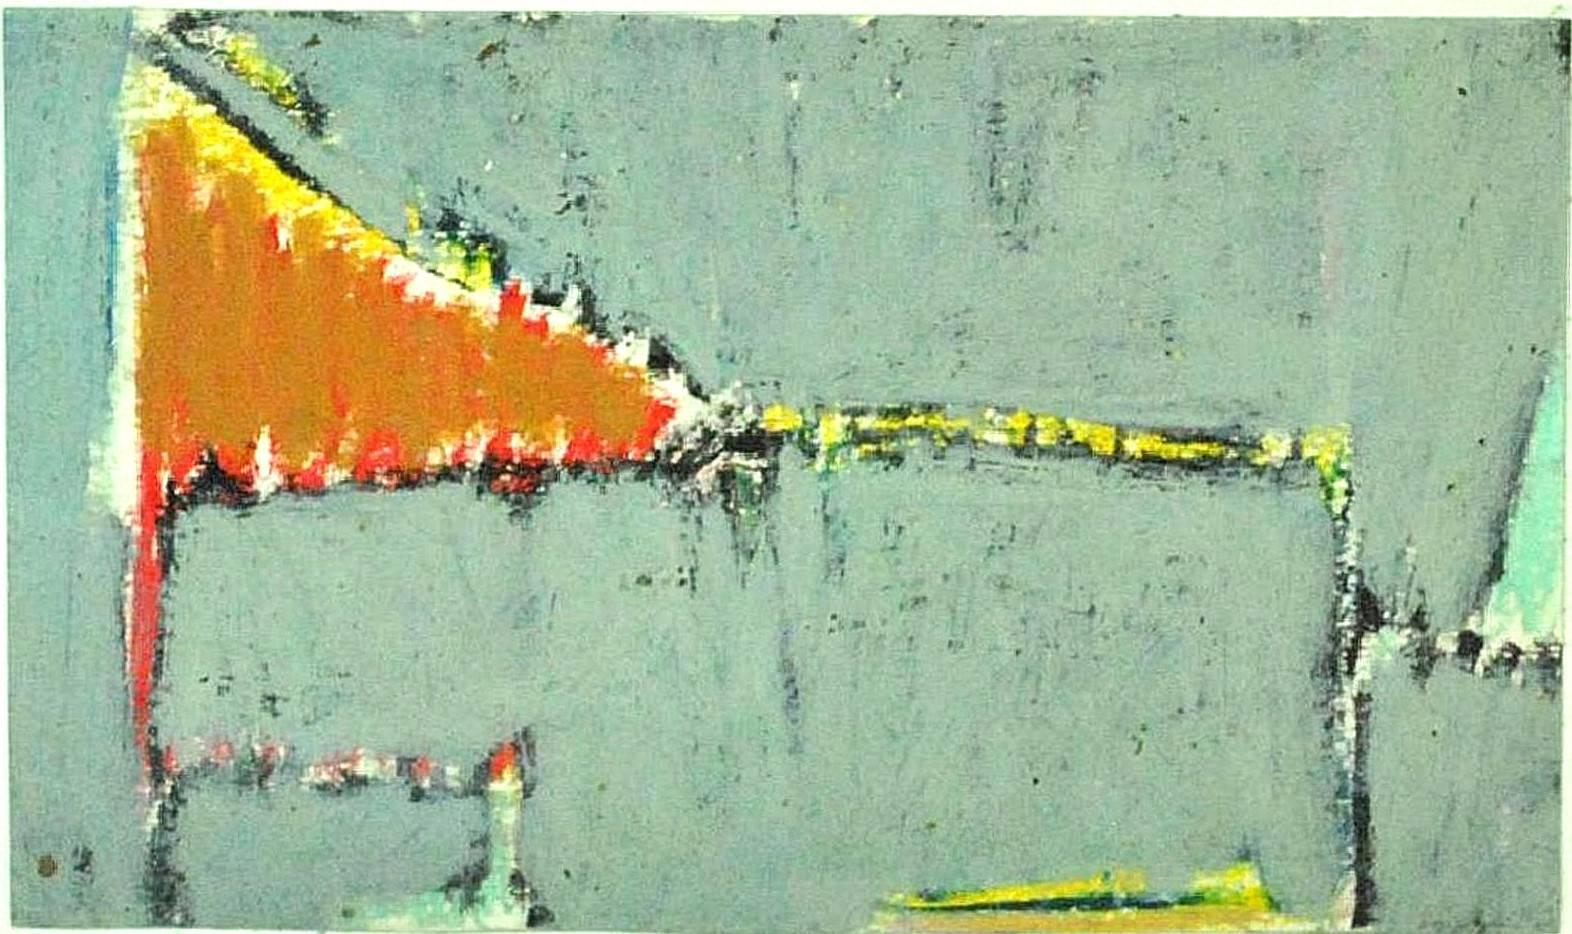 Untitled Abstract Expressionist Painting, 1988. Modernist Composition  - Green Abstract Painting by Seymour Boardman